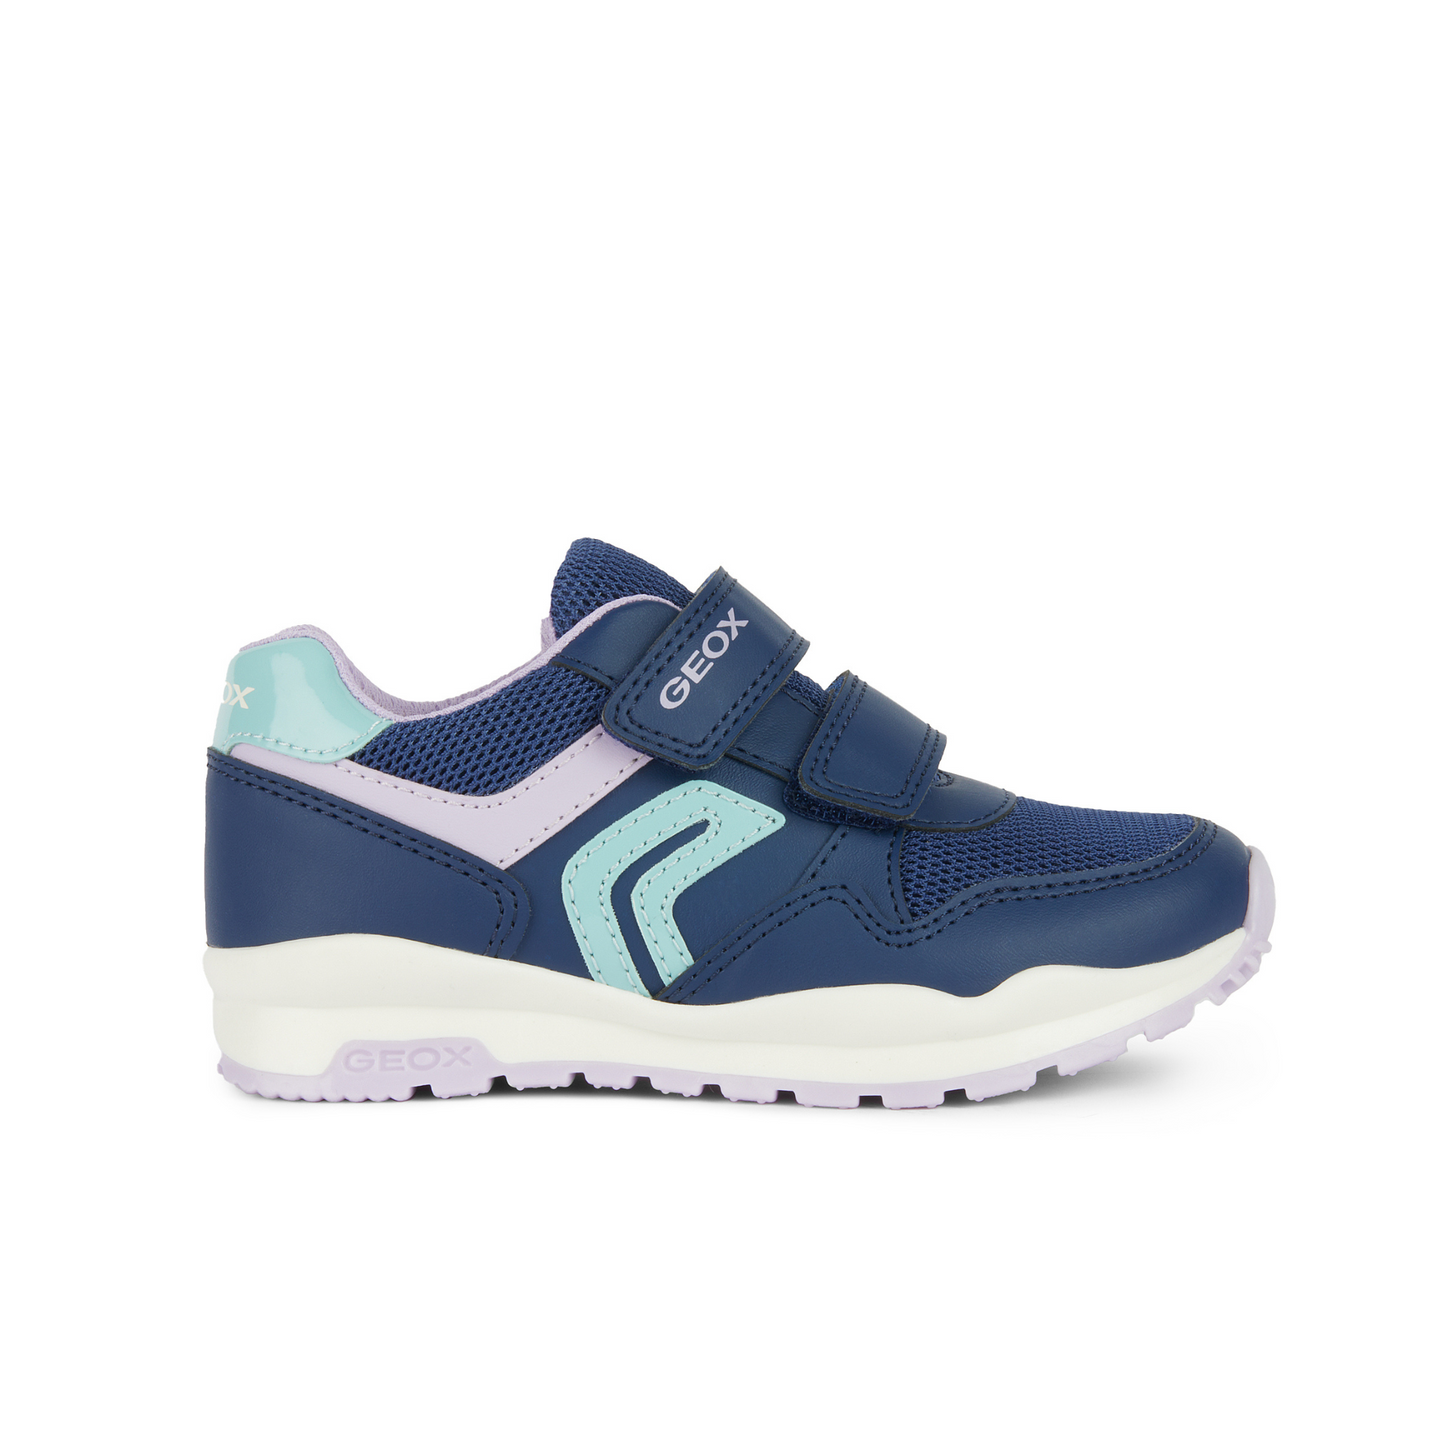 Pavel Trainer in Navy/Lilac